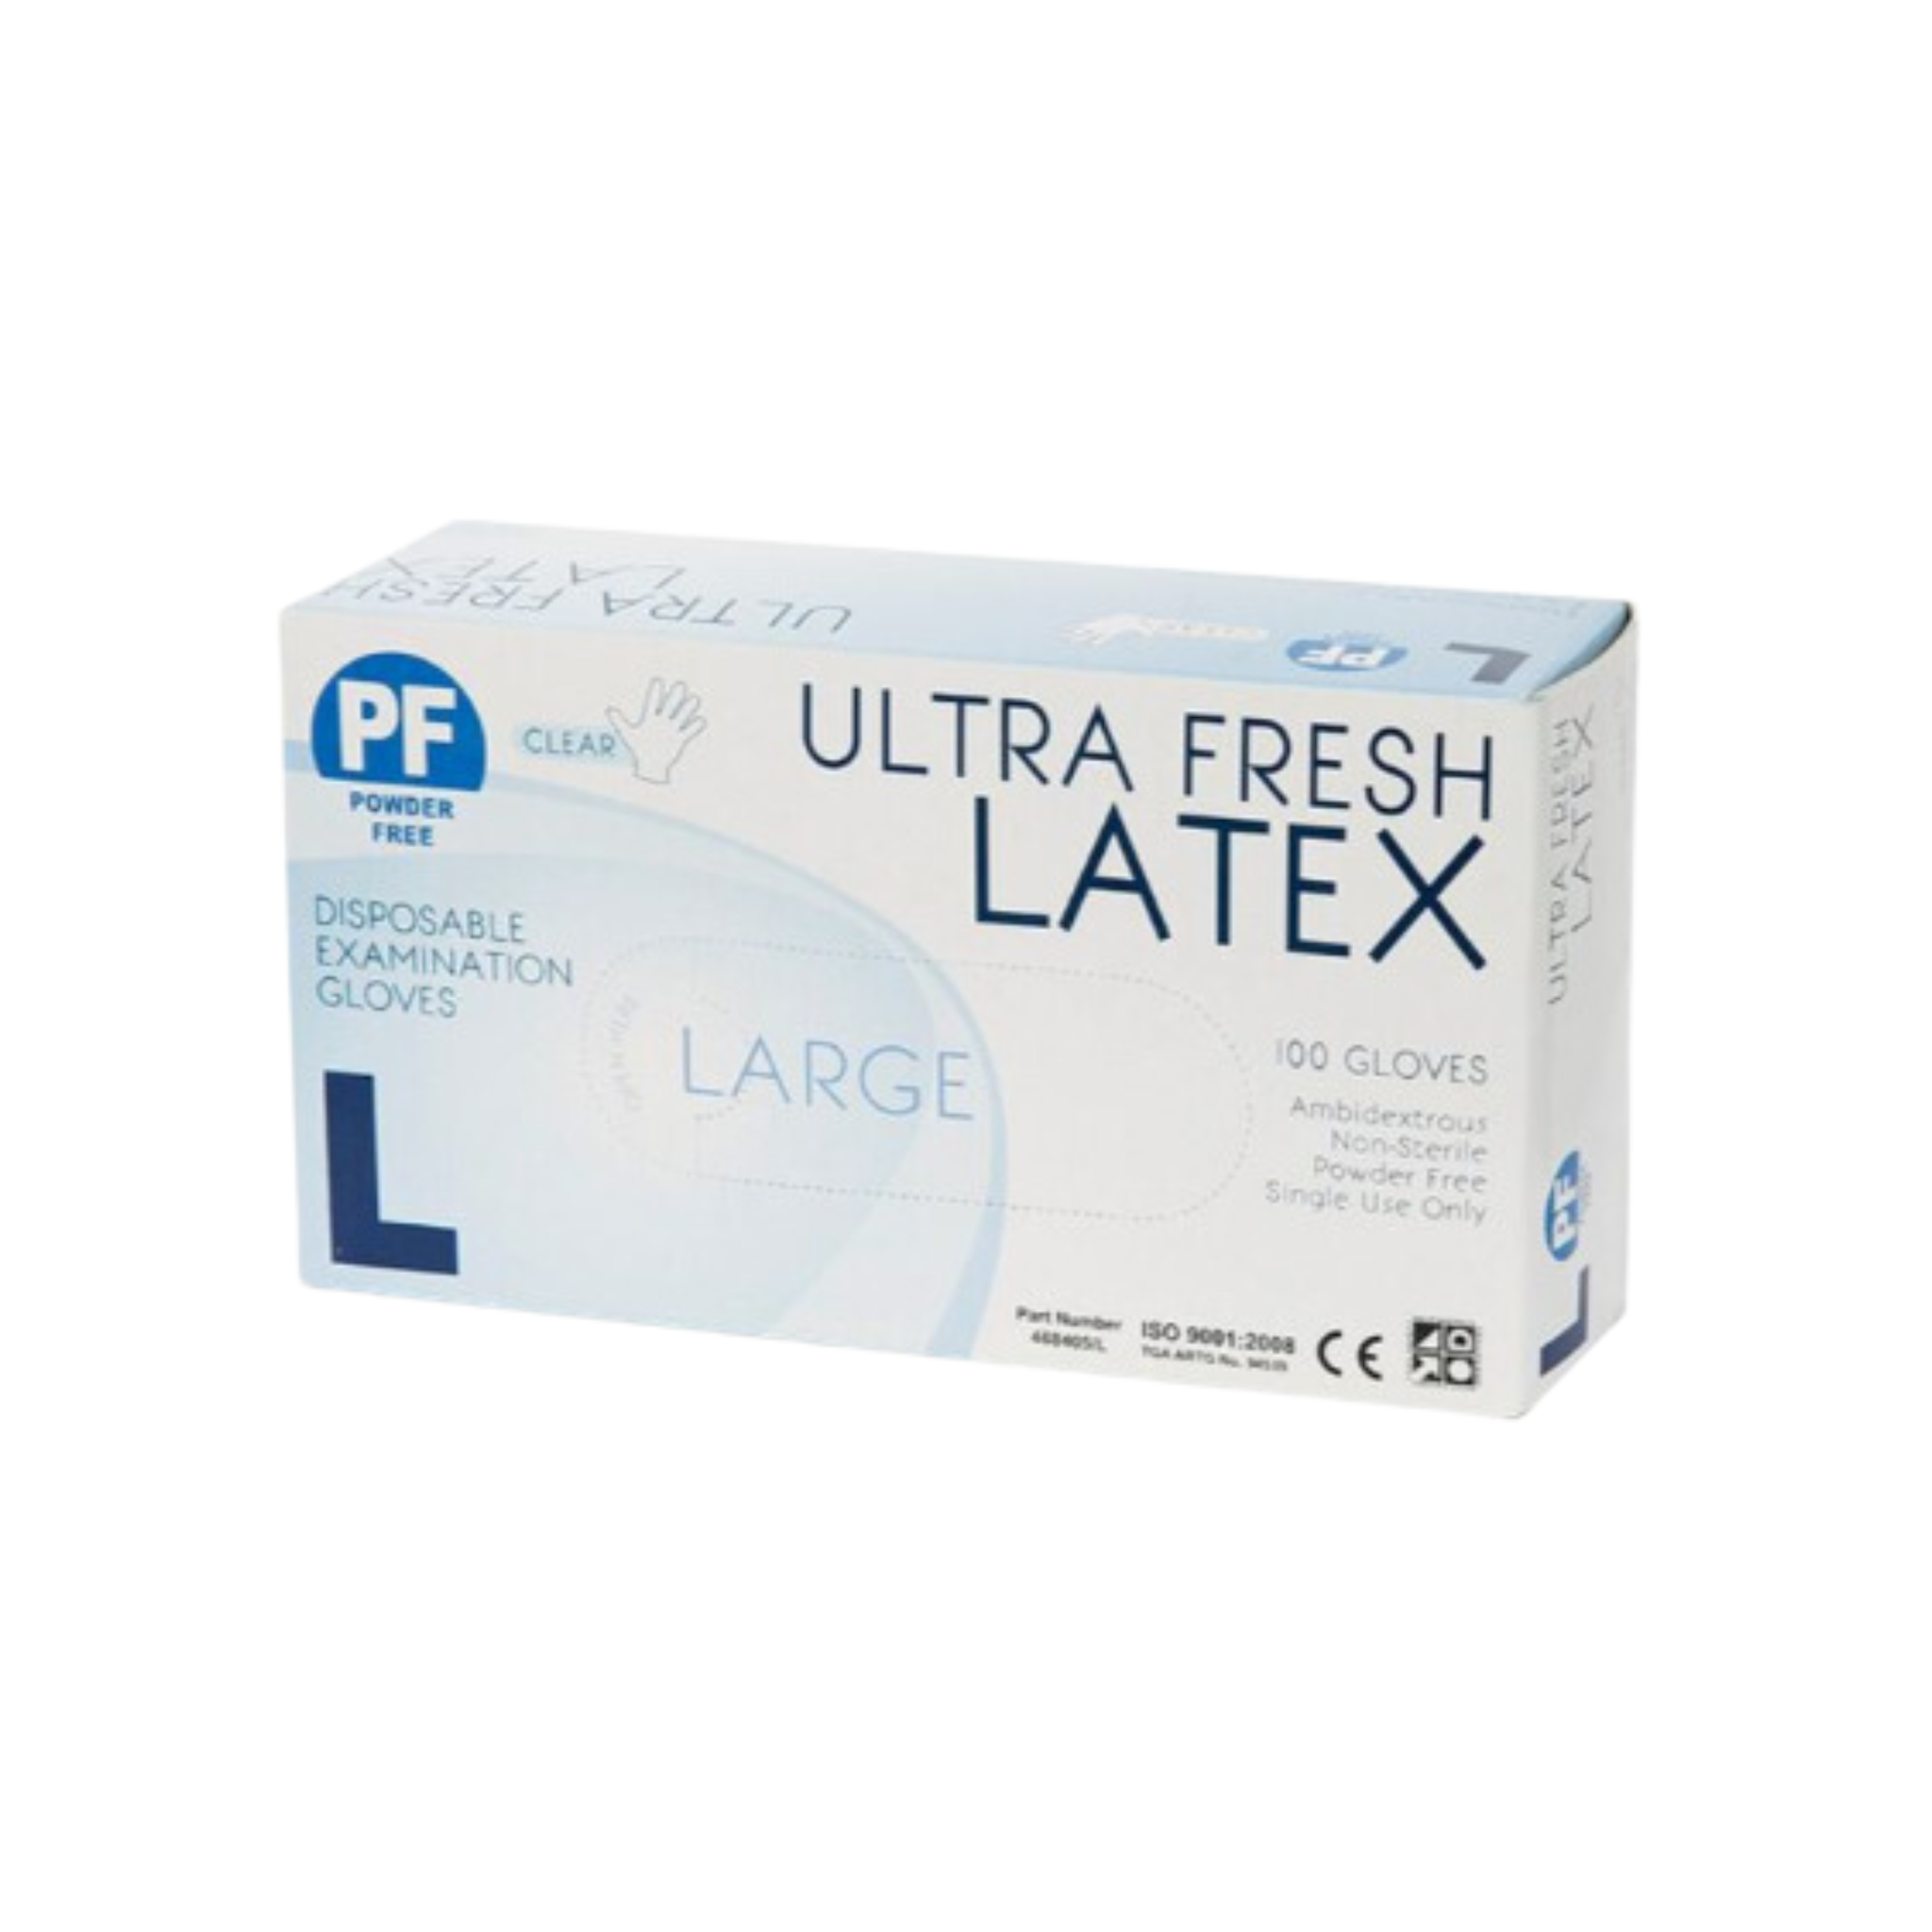 Latex Gloves P/F 10x100's - Large